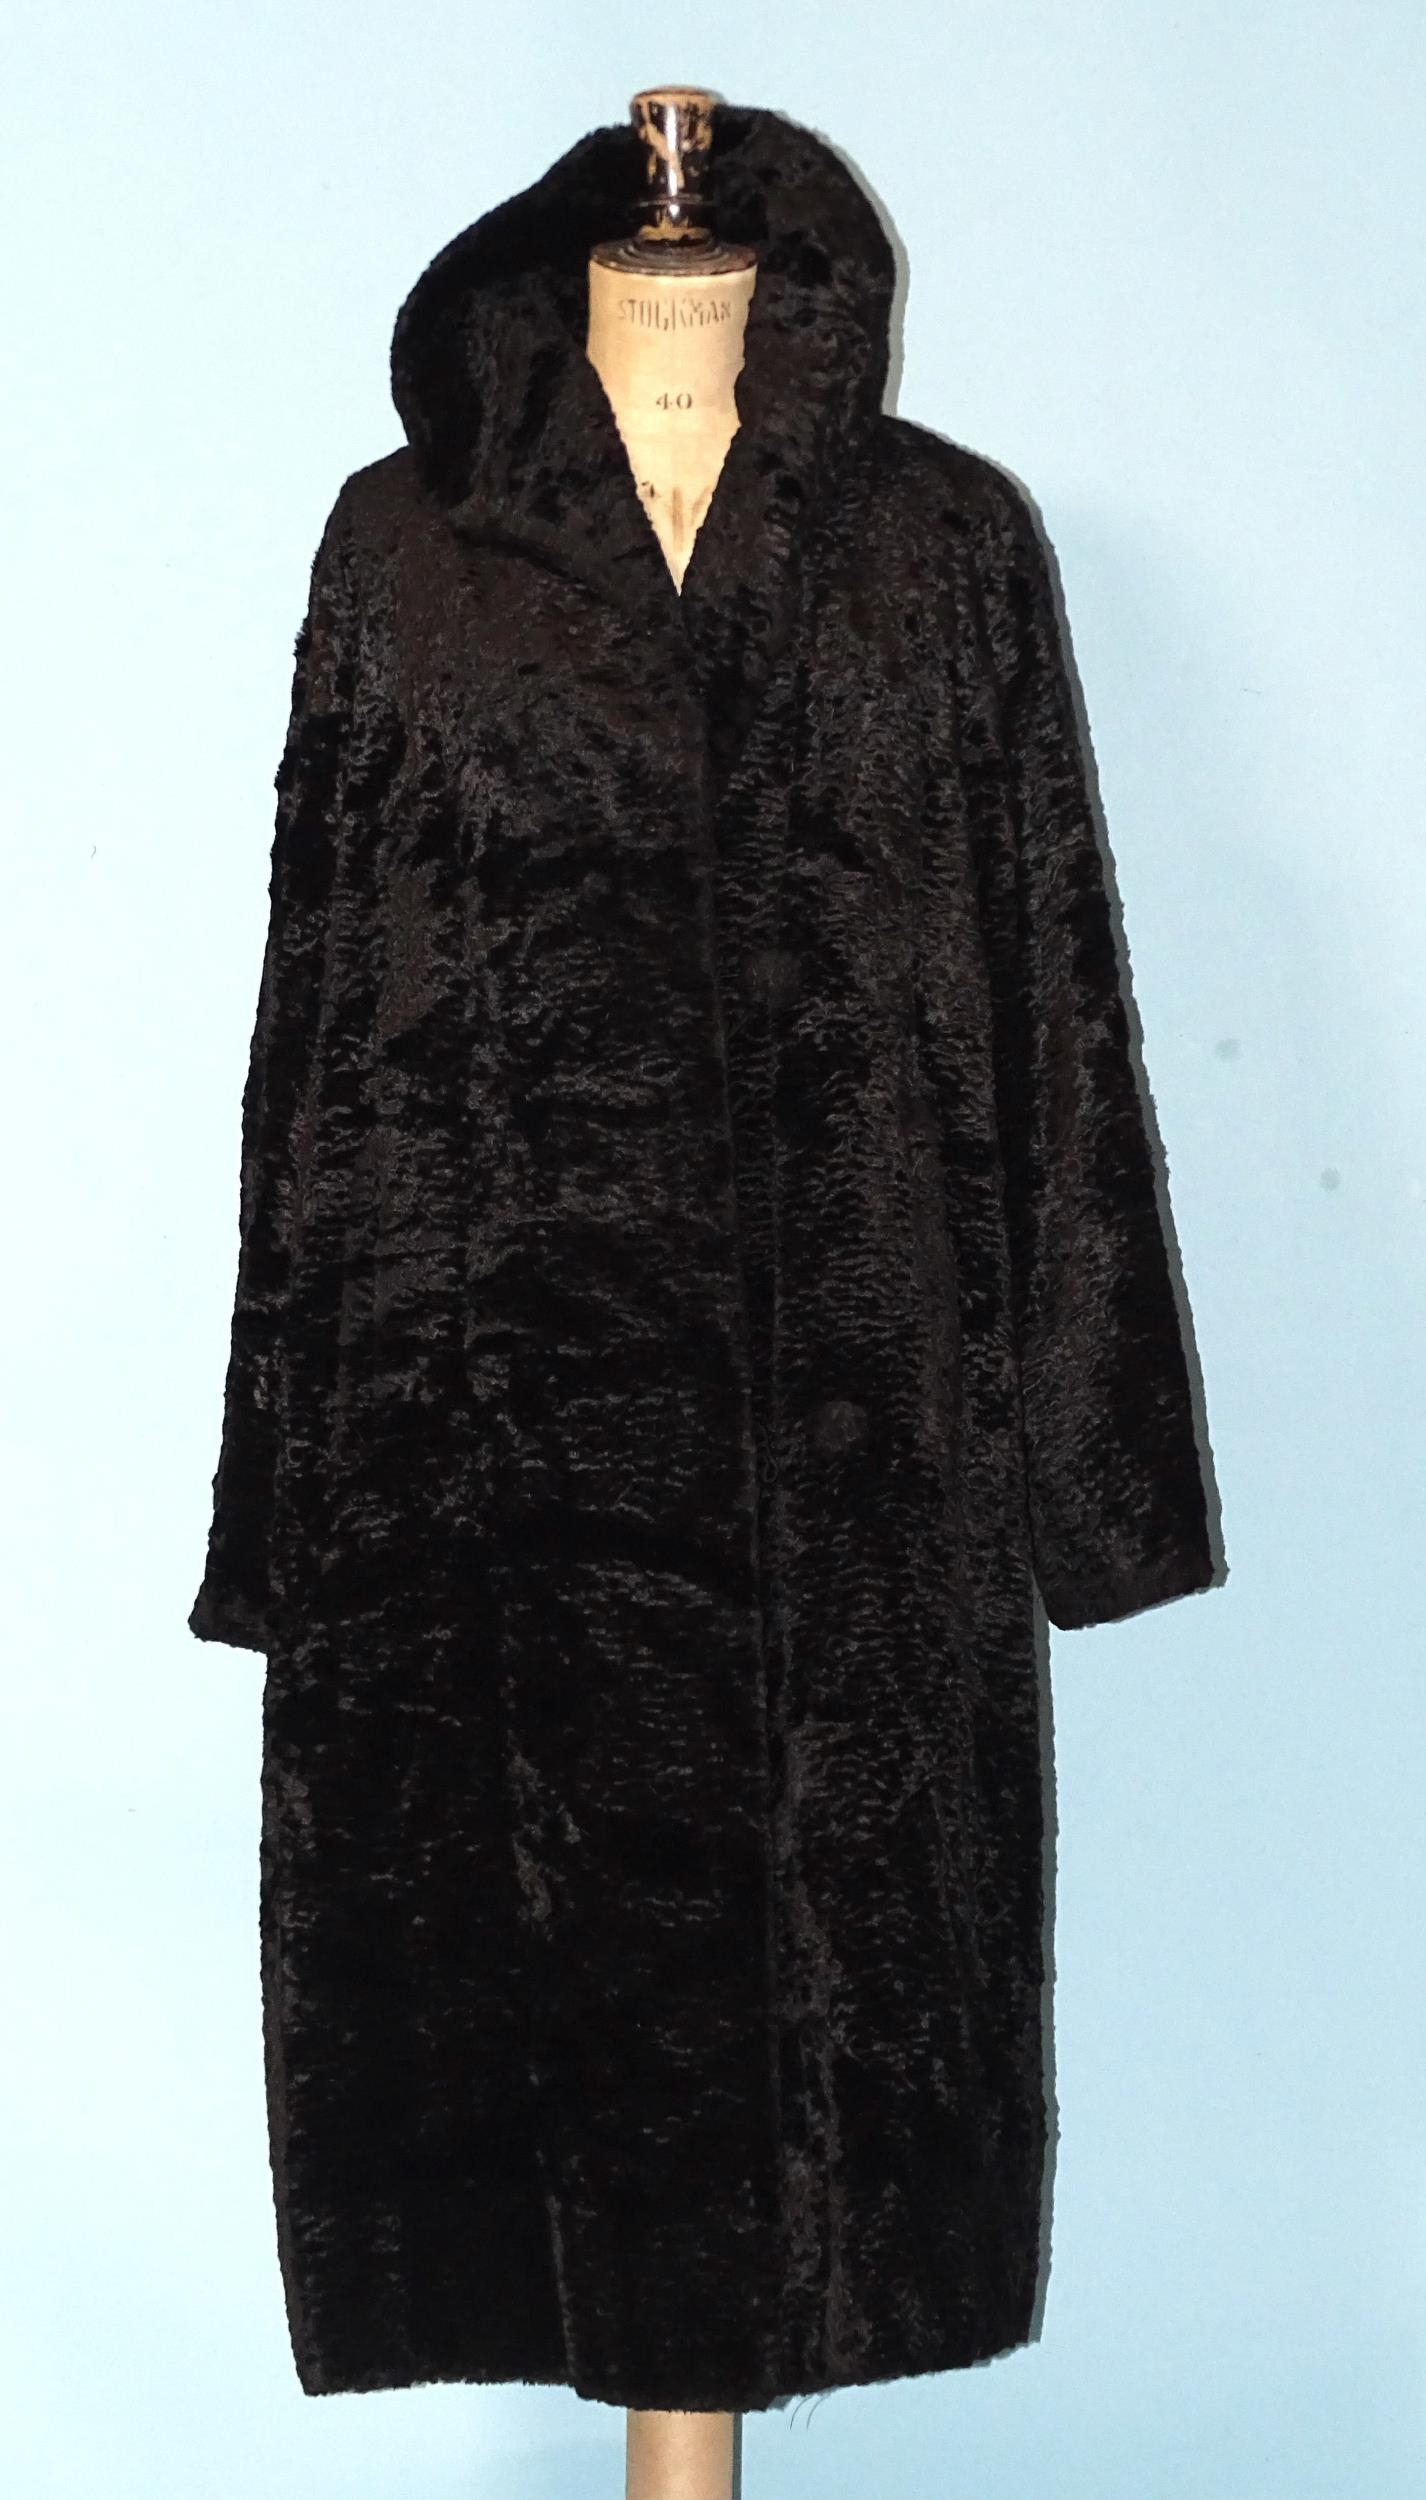 A faux Astrakhan coat, an early-20th century black crepe coat, a later leather/sheepskin